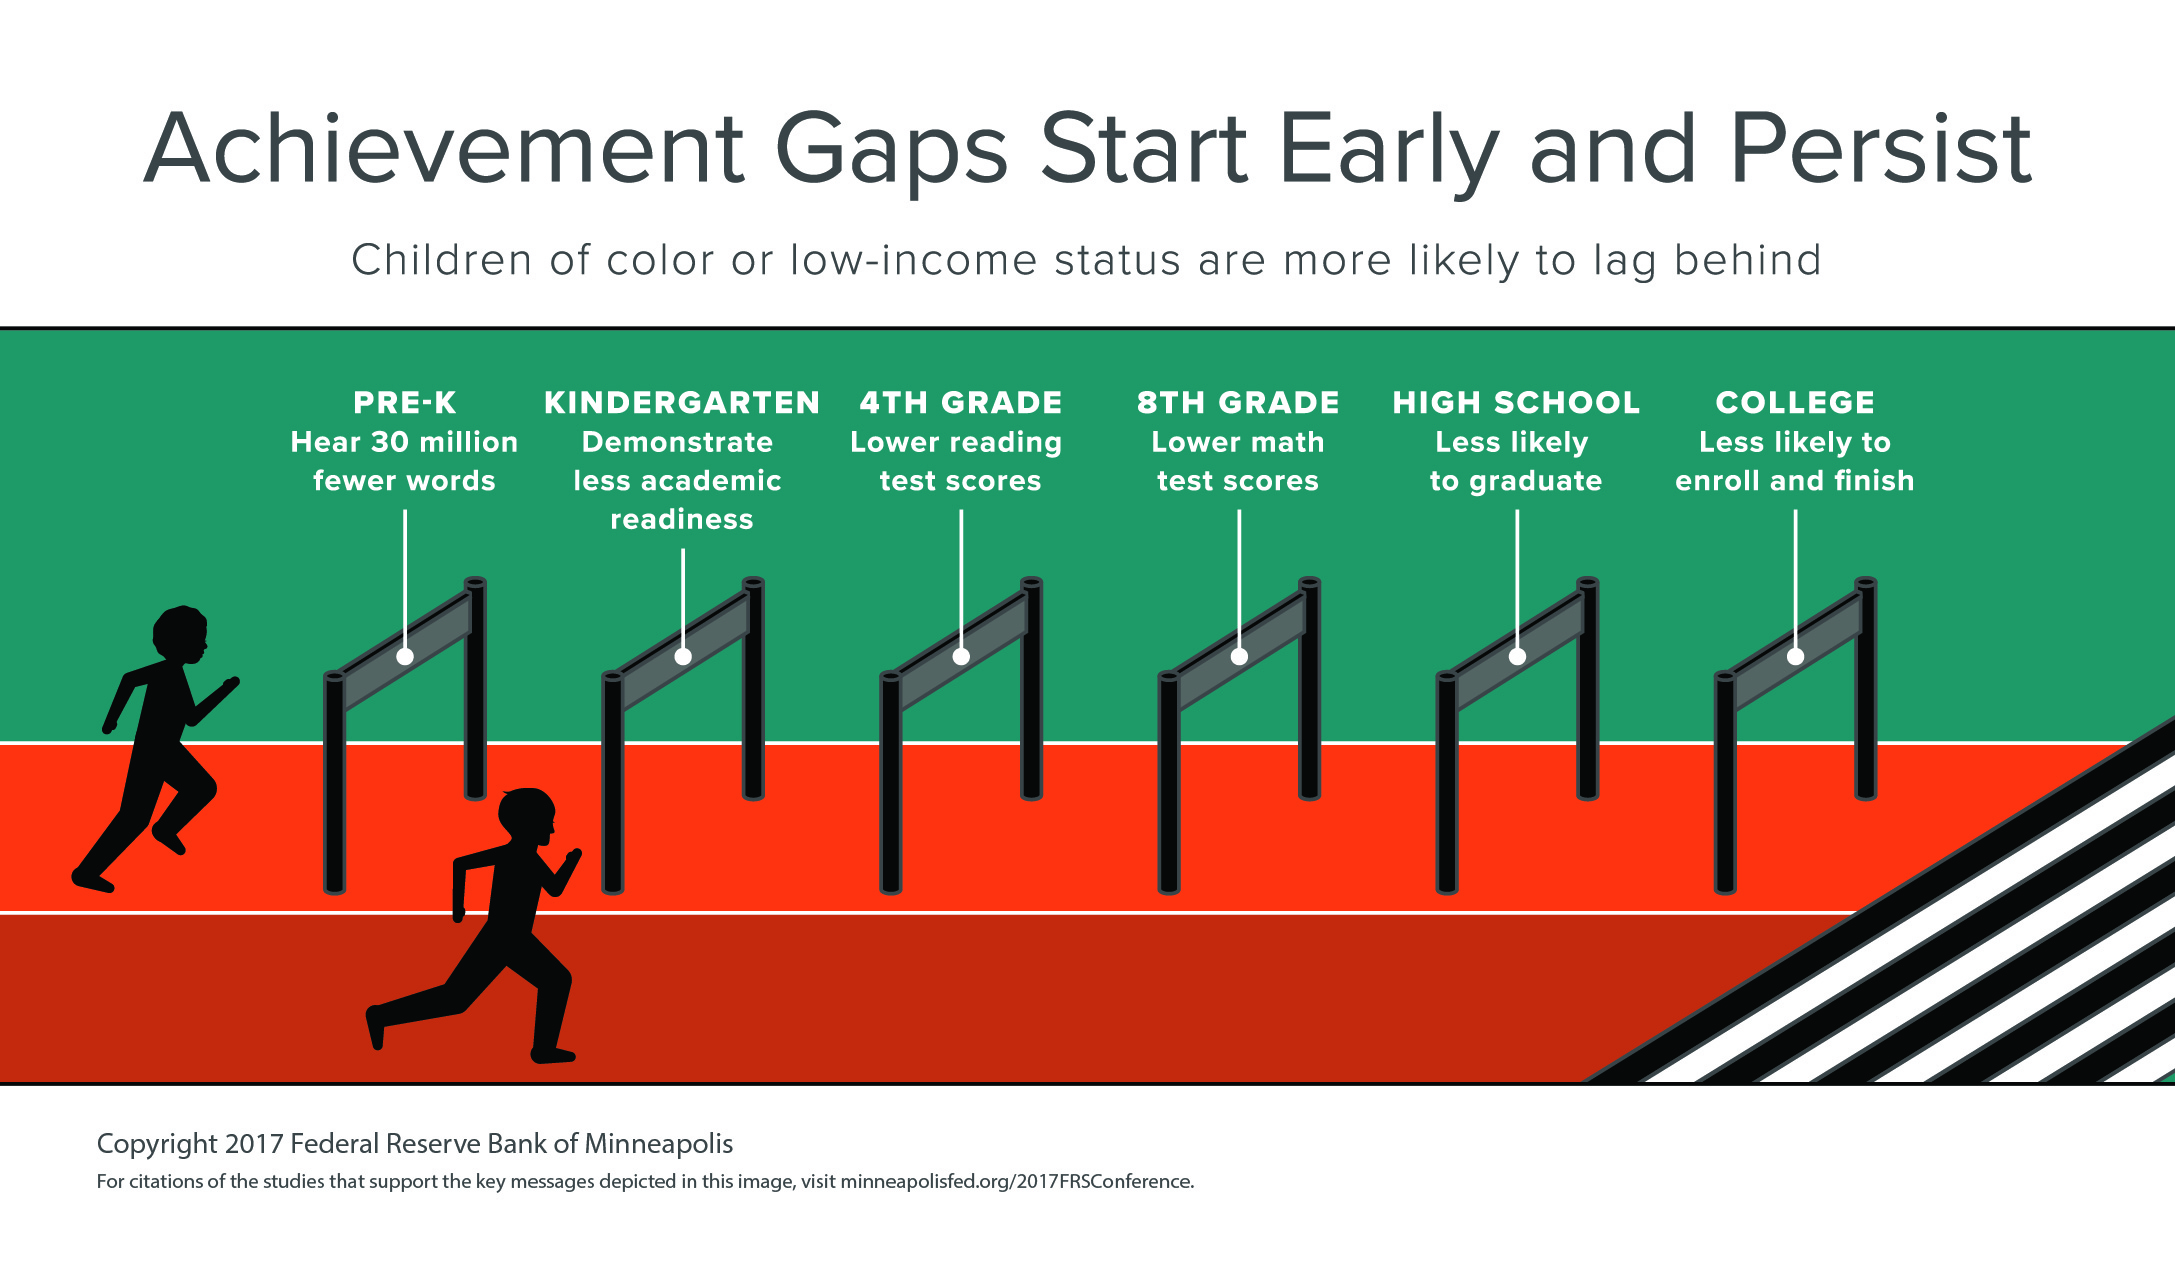 Achievement Gaps Start Early and Persist